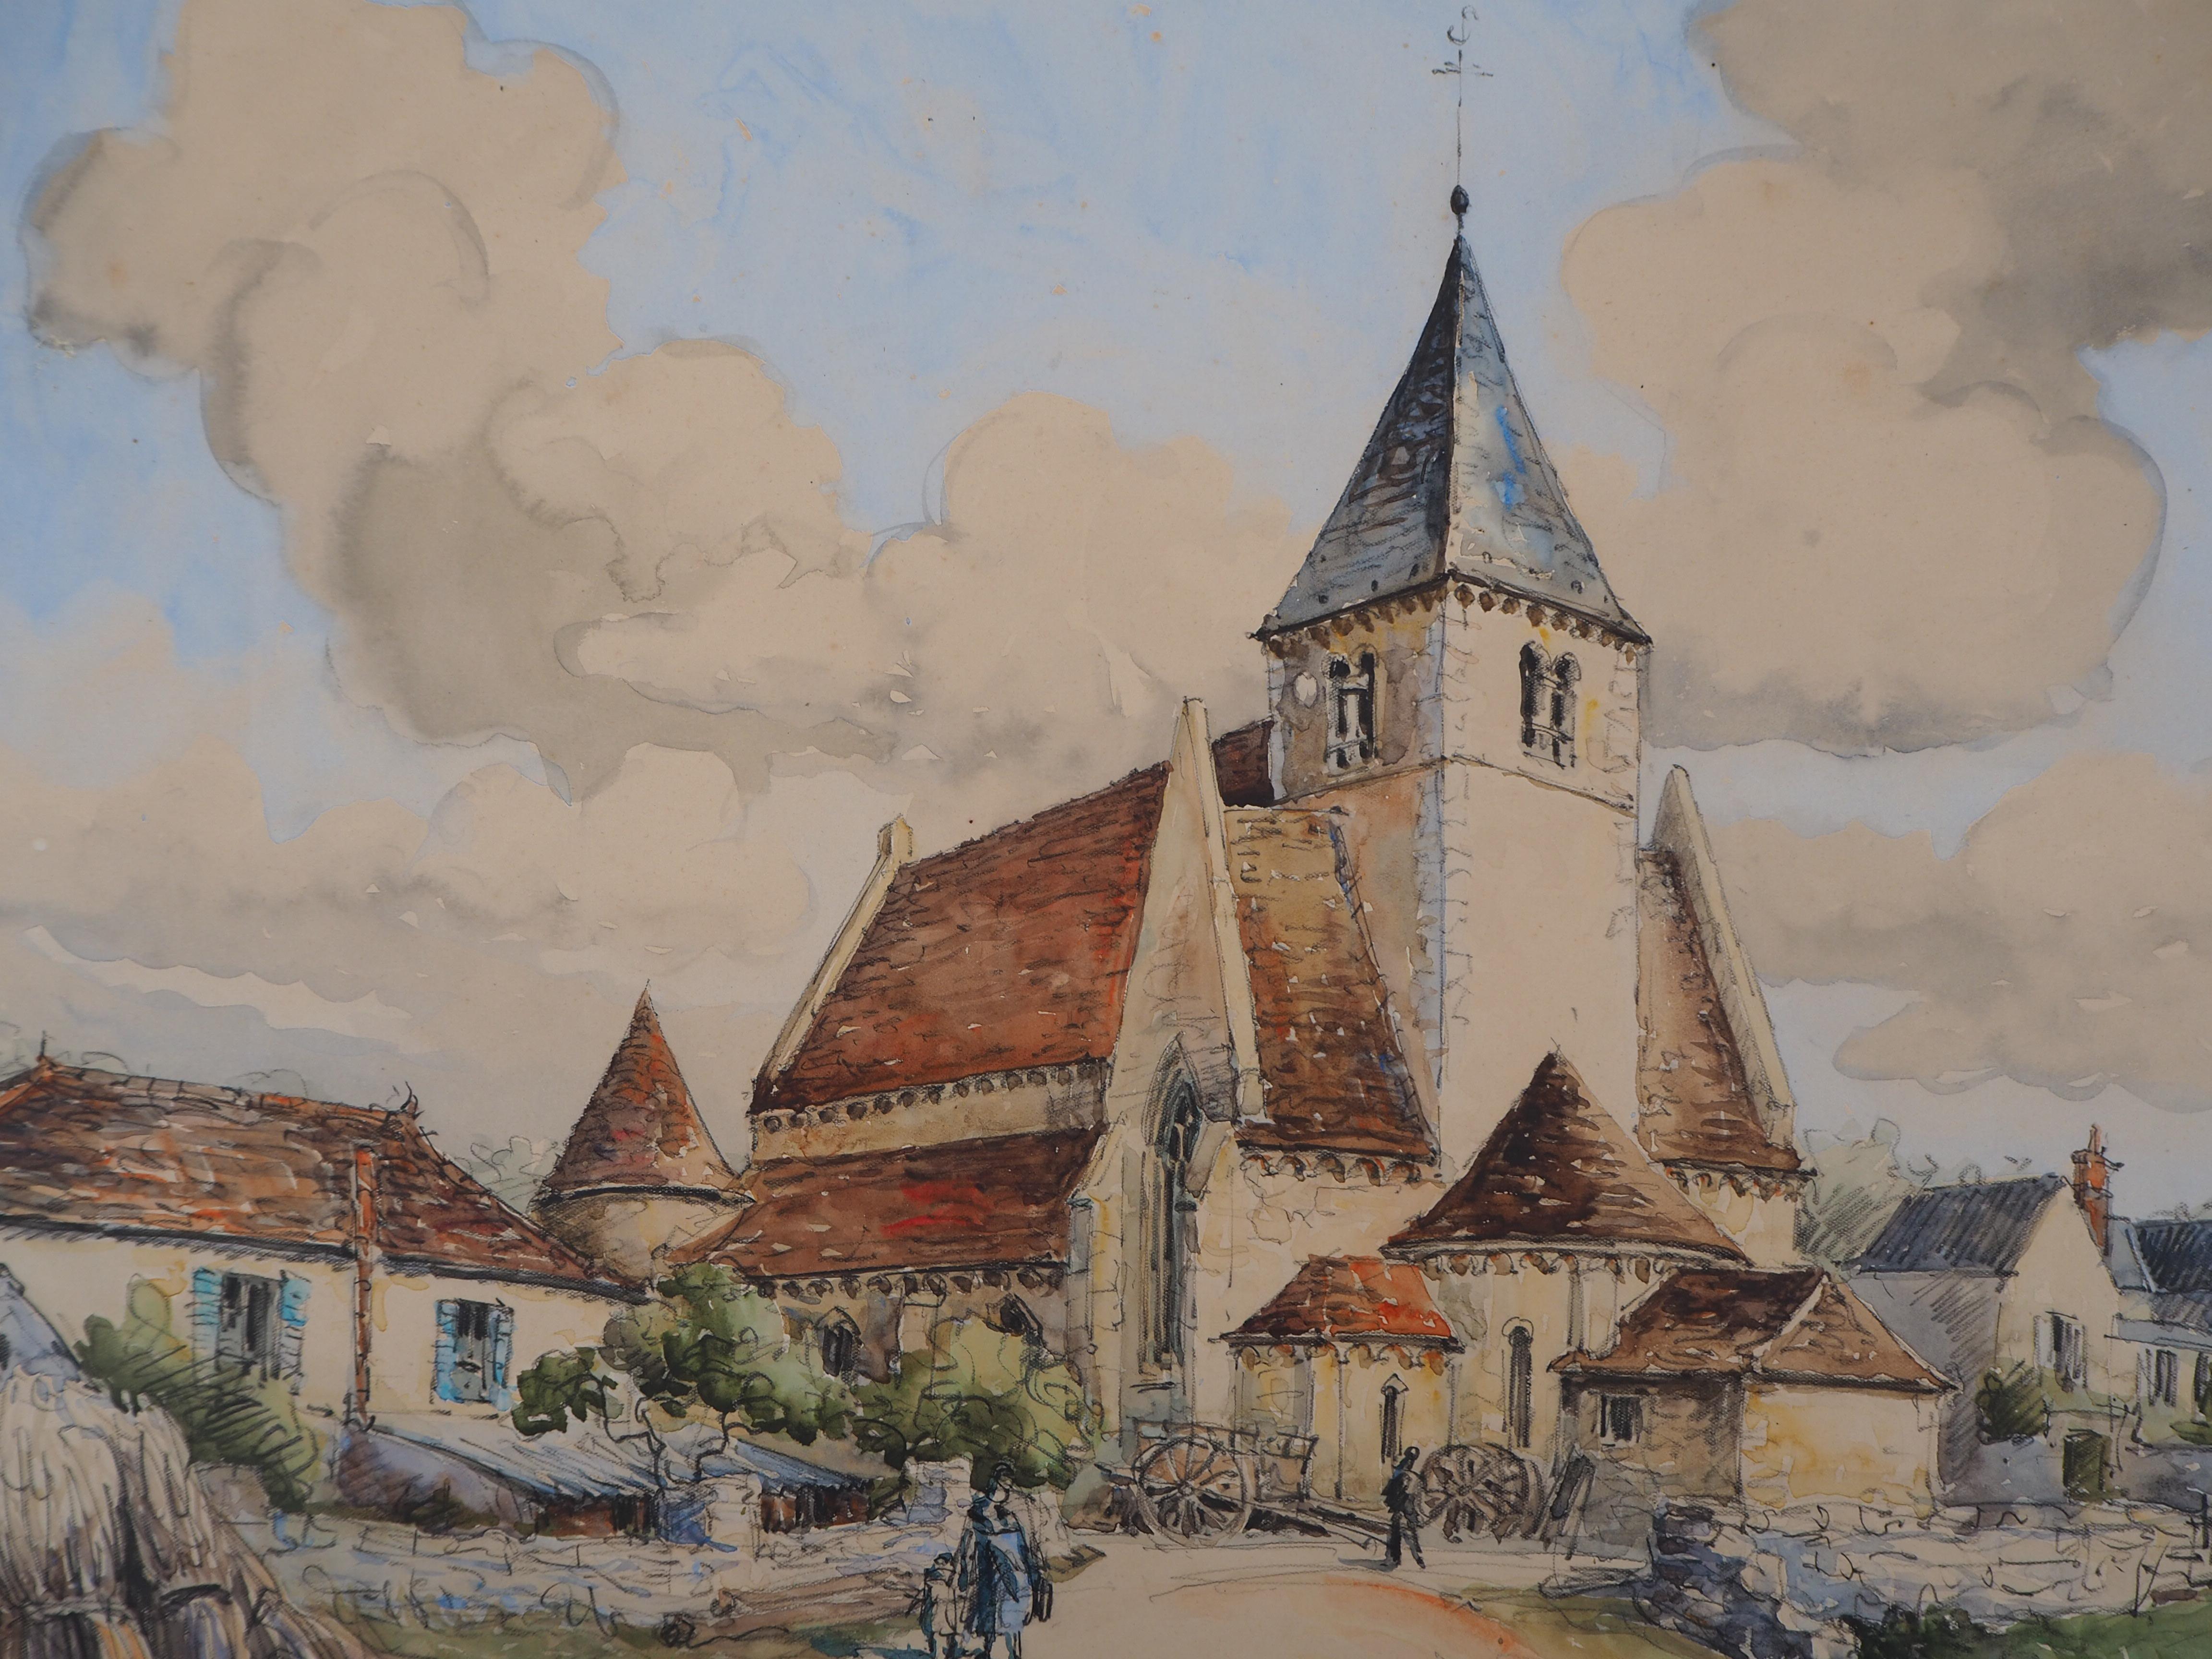 Burgundy : The Roman Church of Druyes - Original watercolor, Handsigned - Modern Print by Frank Will